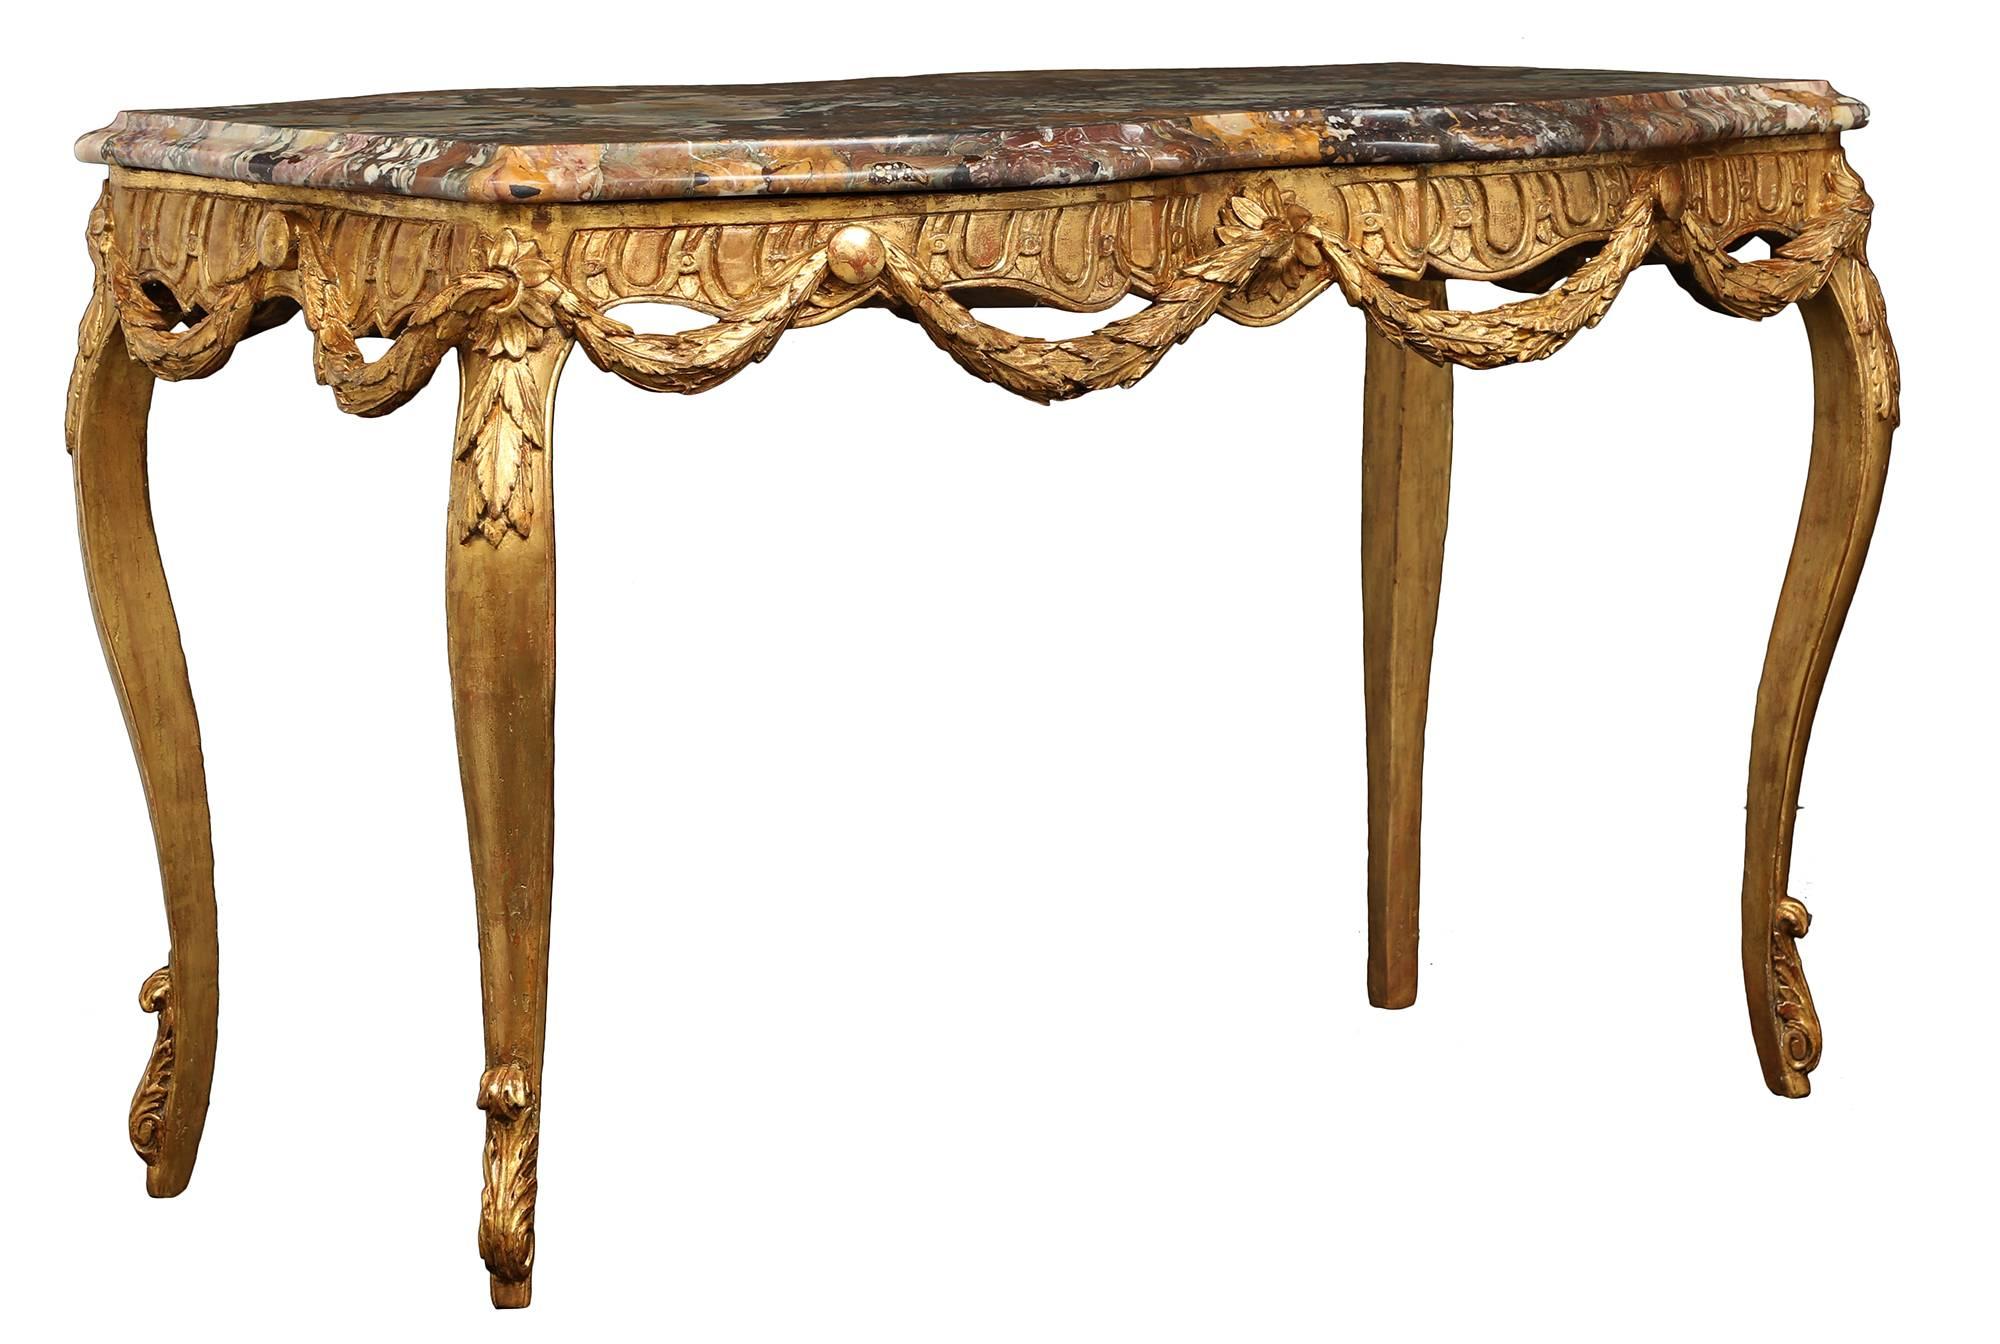 An elegant Italian 18th century Louis XV period giltwood and marble center table. The table is raised by slender cabriole legs with carved acanthus leaves. The intricate scalloped frieze is decorated with charming floral rosettes reserves at the